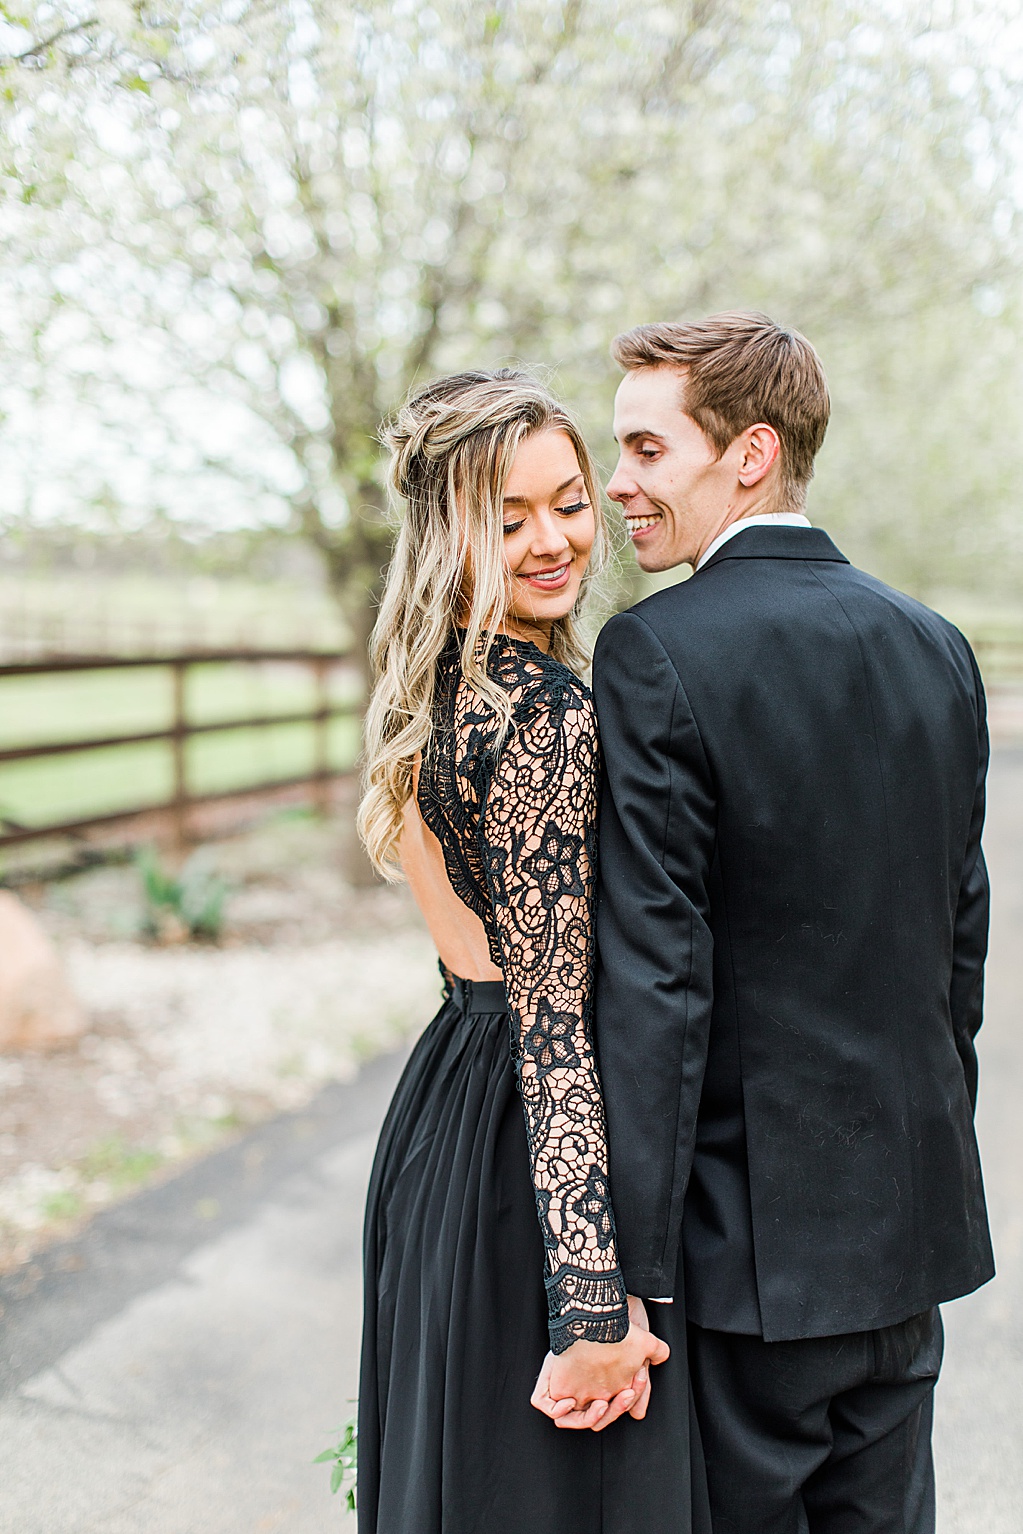 King River Ranch Wedding Venue in Johnson City Engagement Photos in the white Pear blossoms by Allison Jeffers Wedding Photography 0041